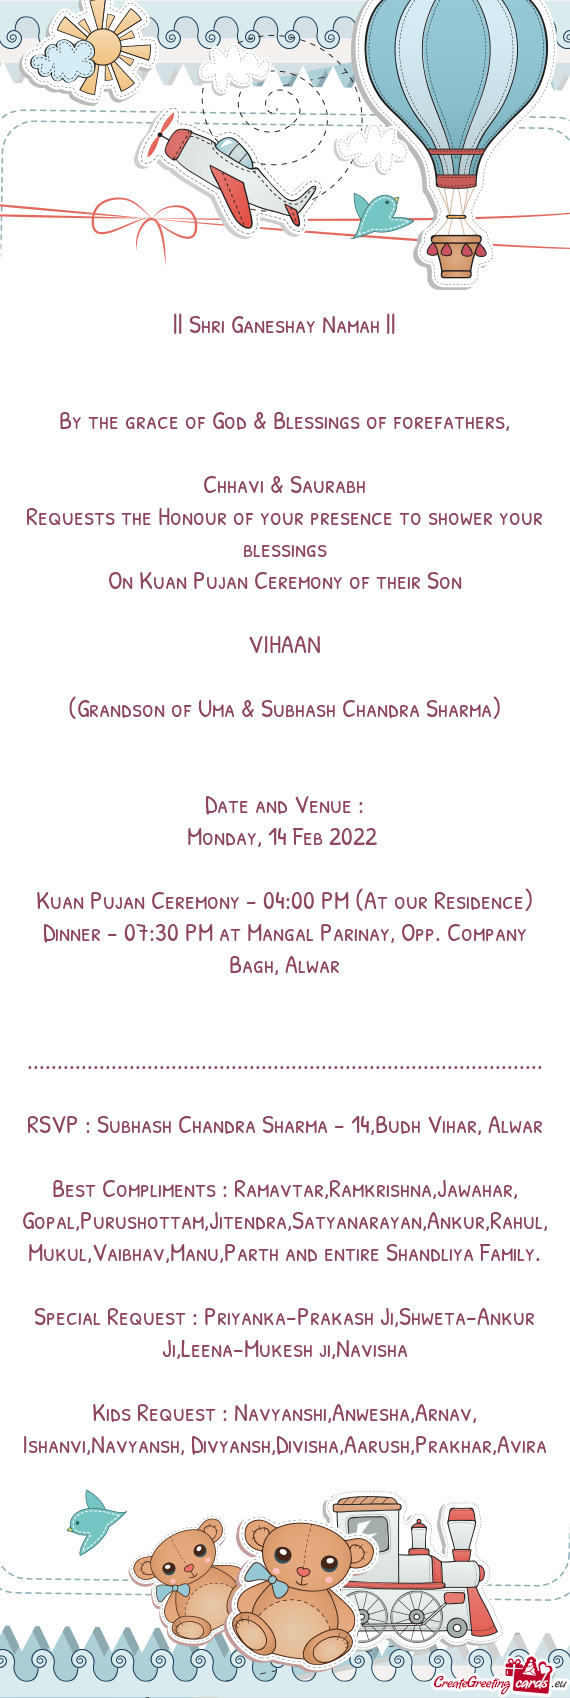 Kuan Pujan Ceremony - 04:00 PM (At our Residence)